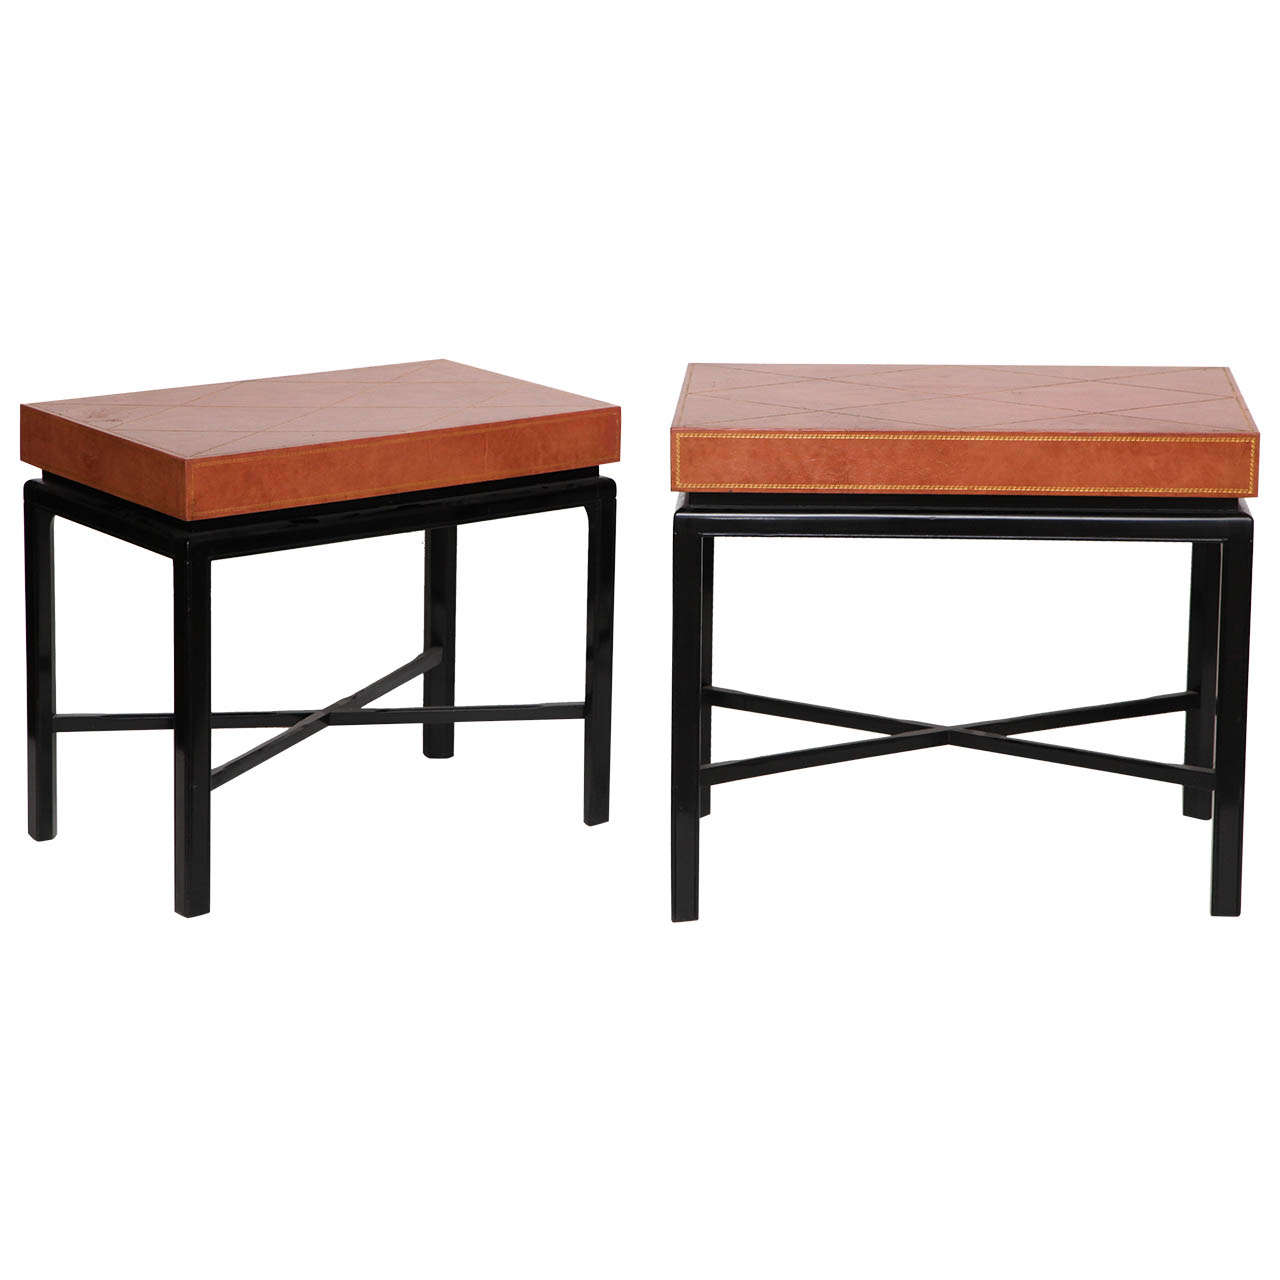 Pair of Leather Top Side Tables by Tommi Parzinger